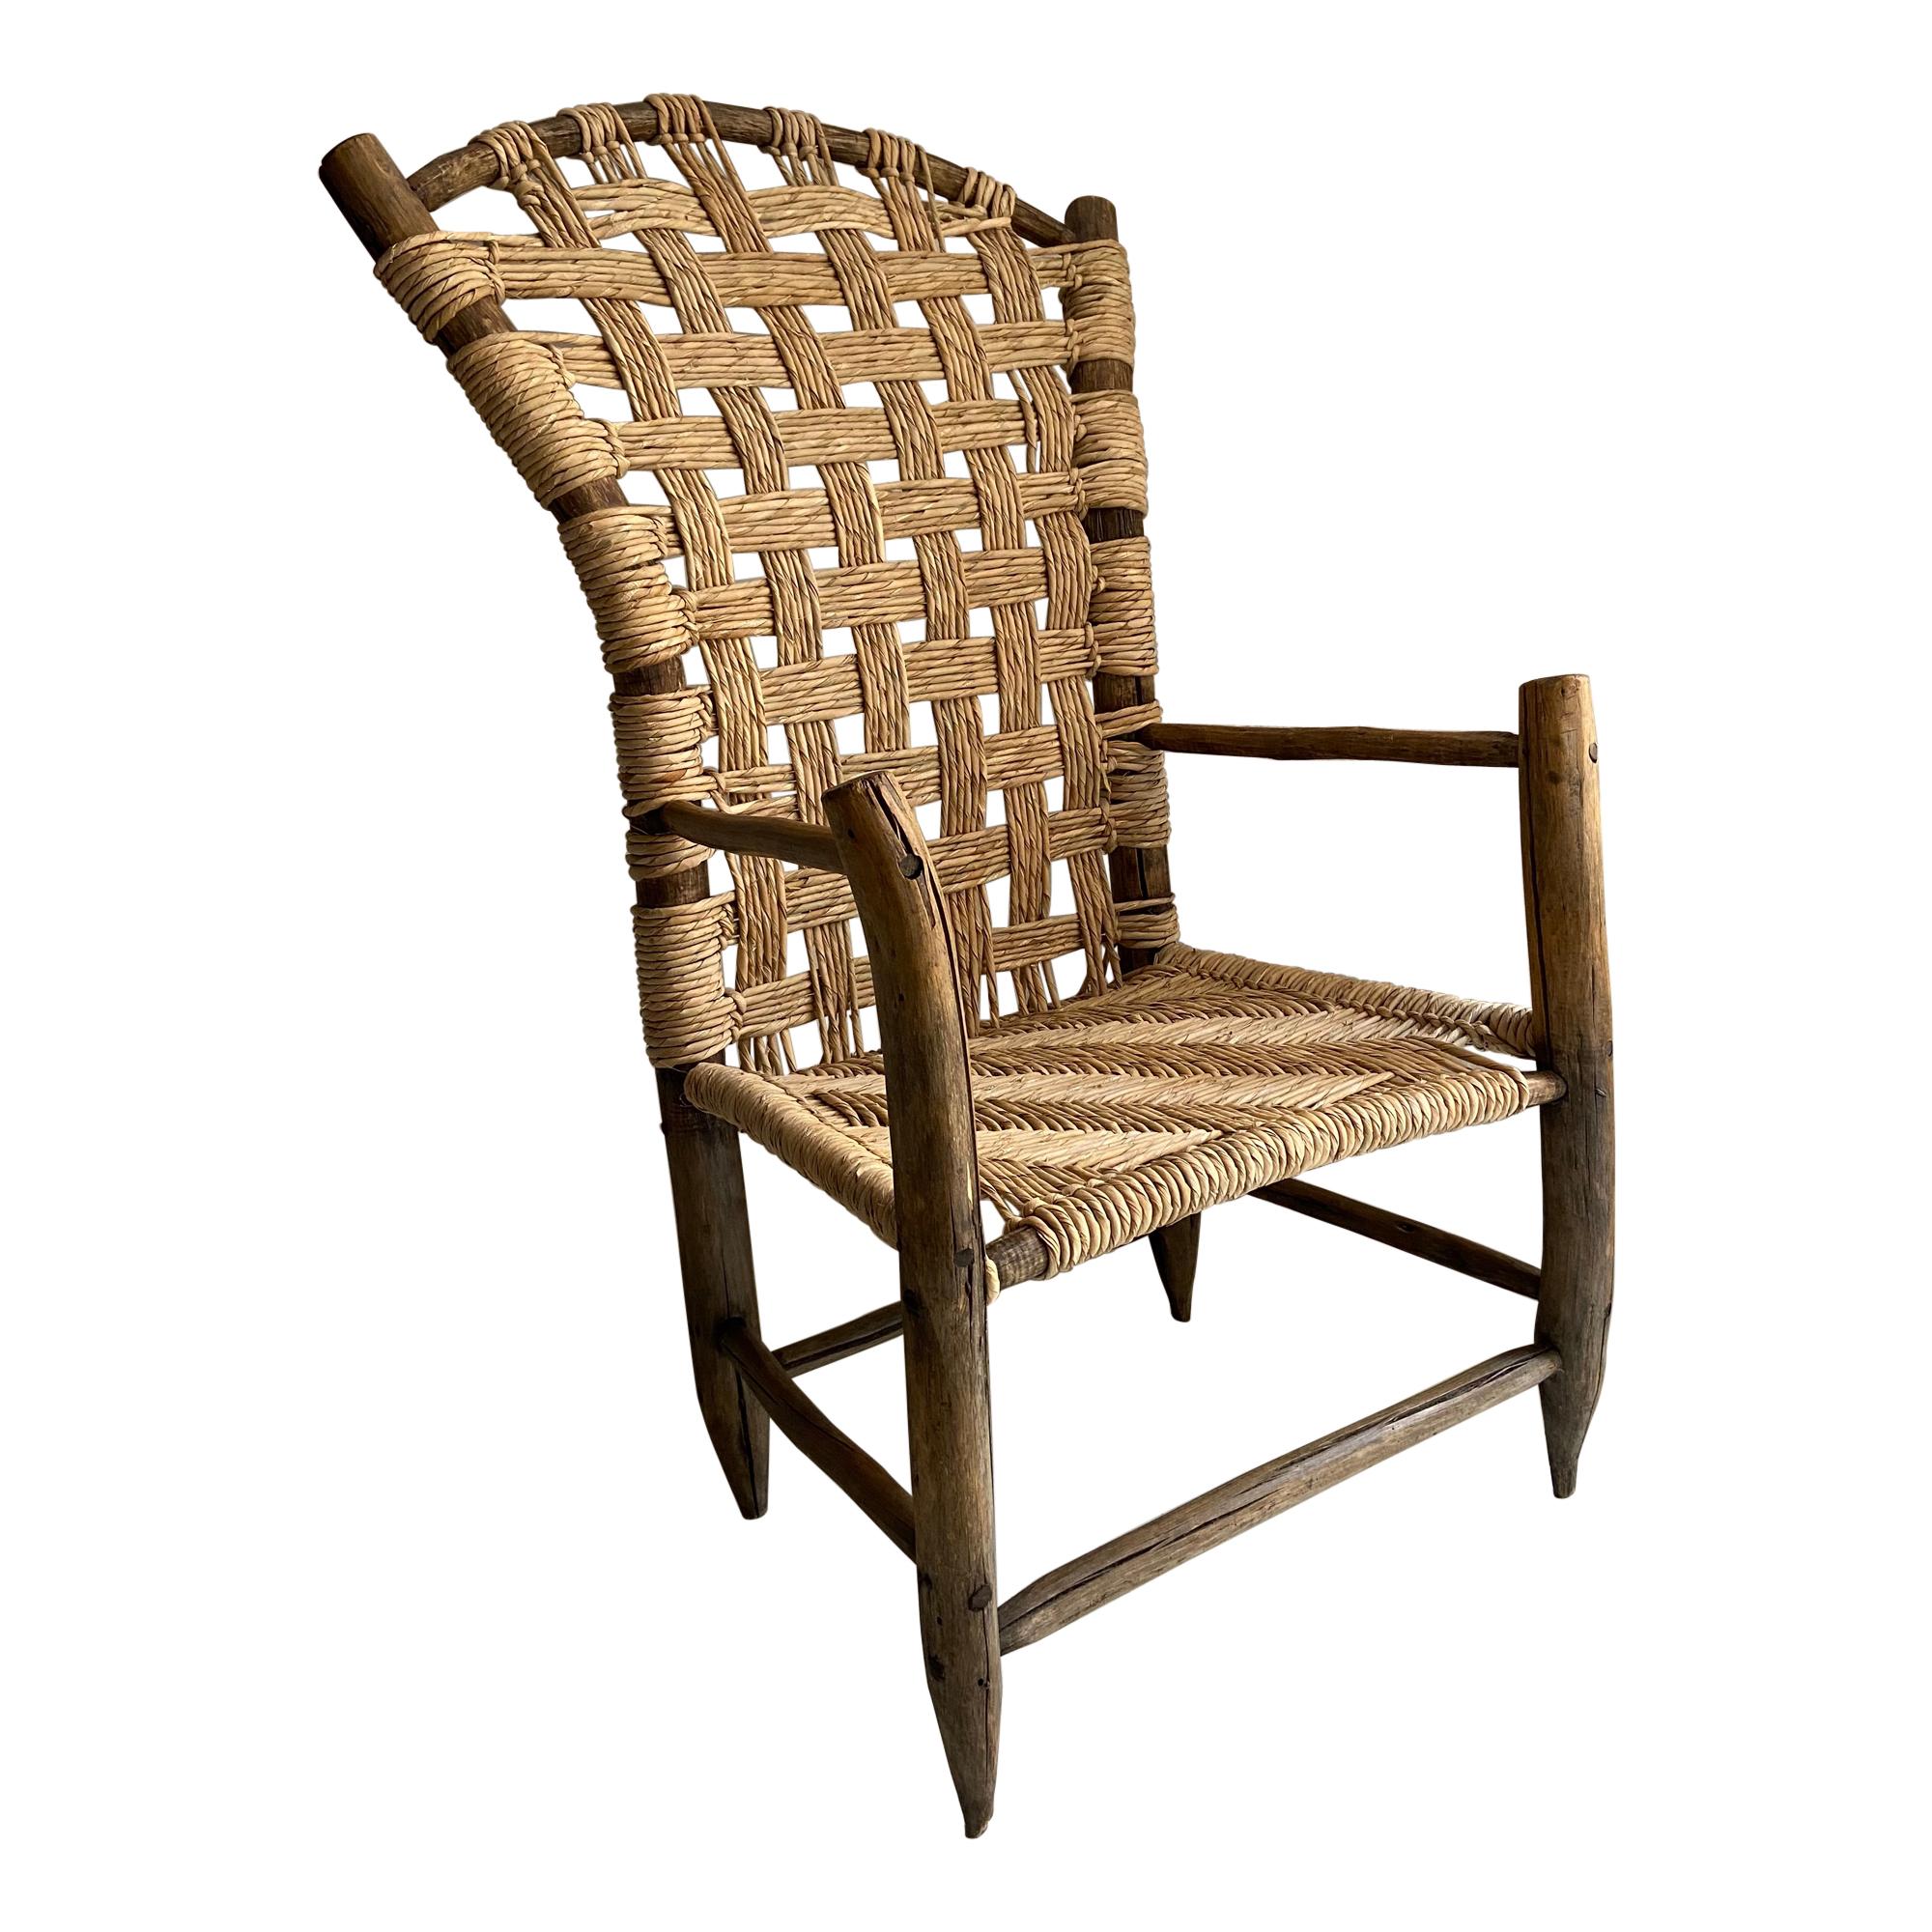 Midcentury Country Chair from Mexico